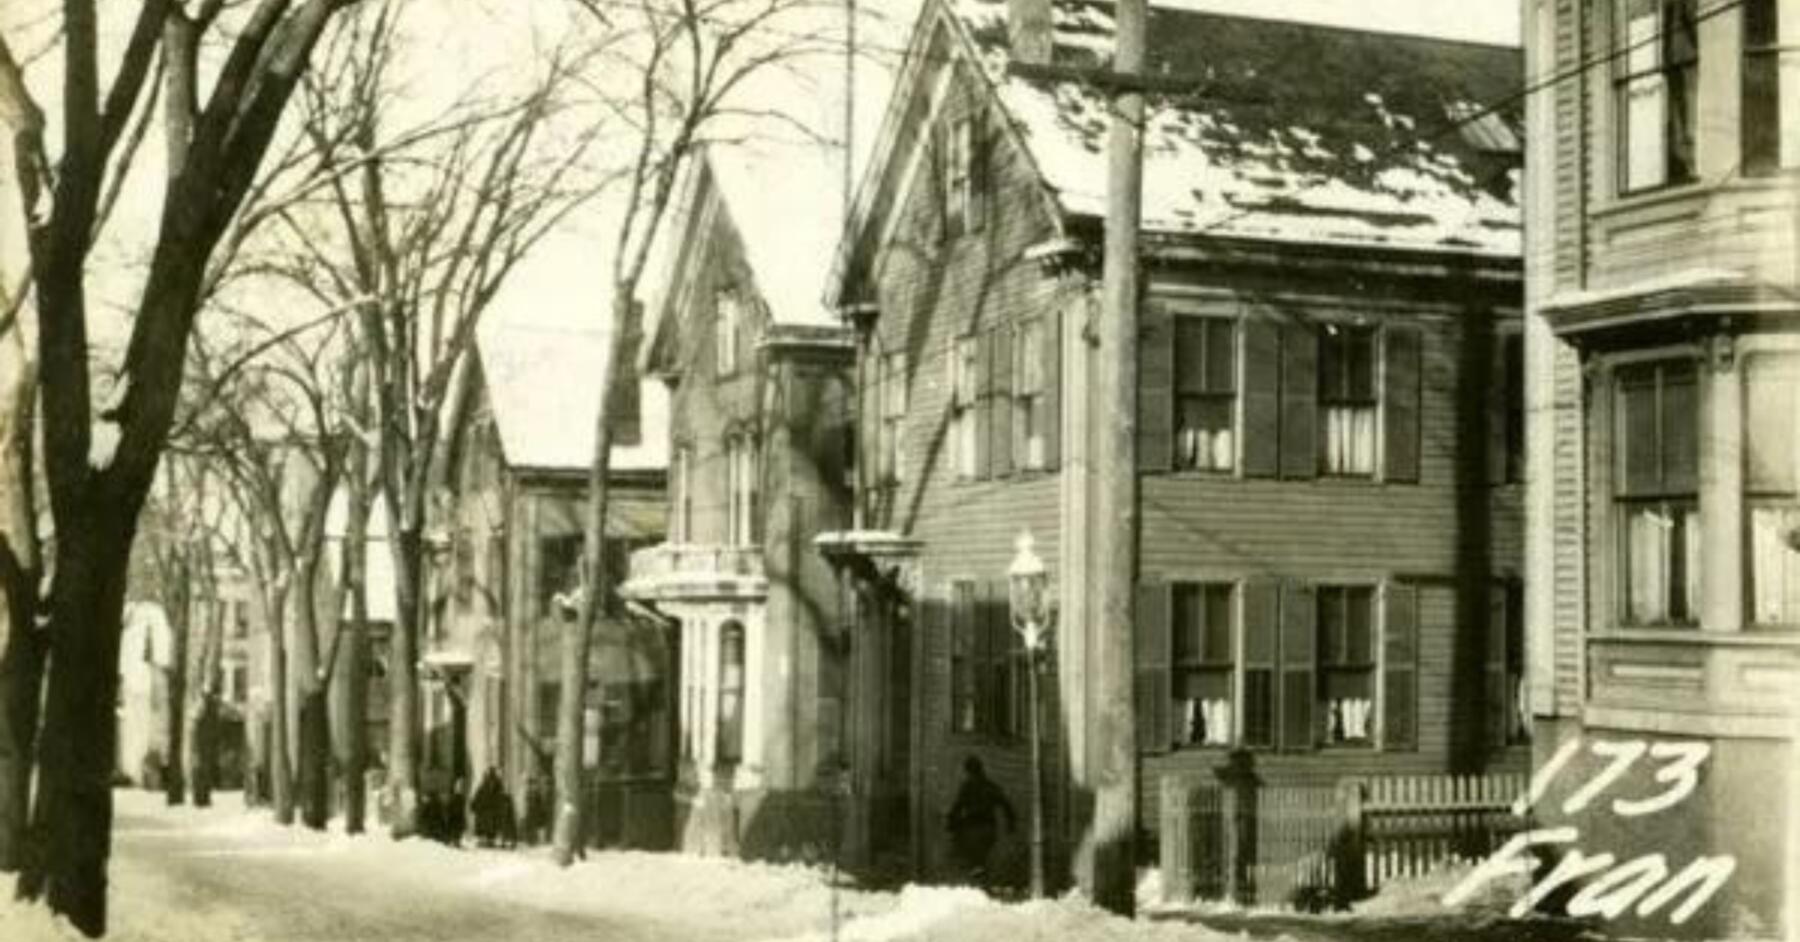 173 Franklin Street in the 1920s